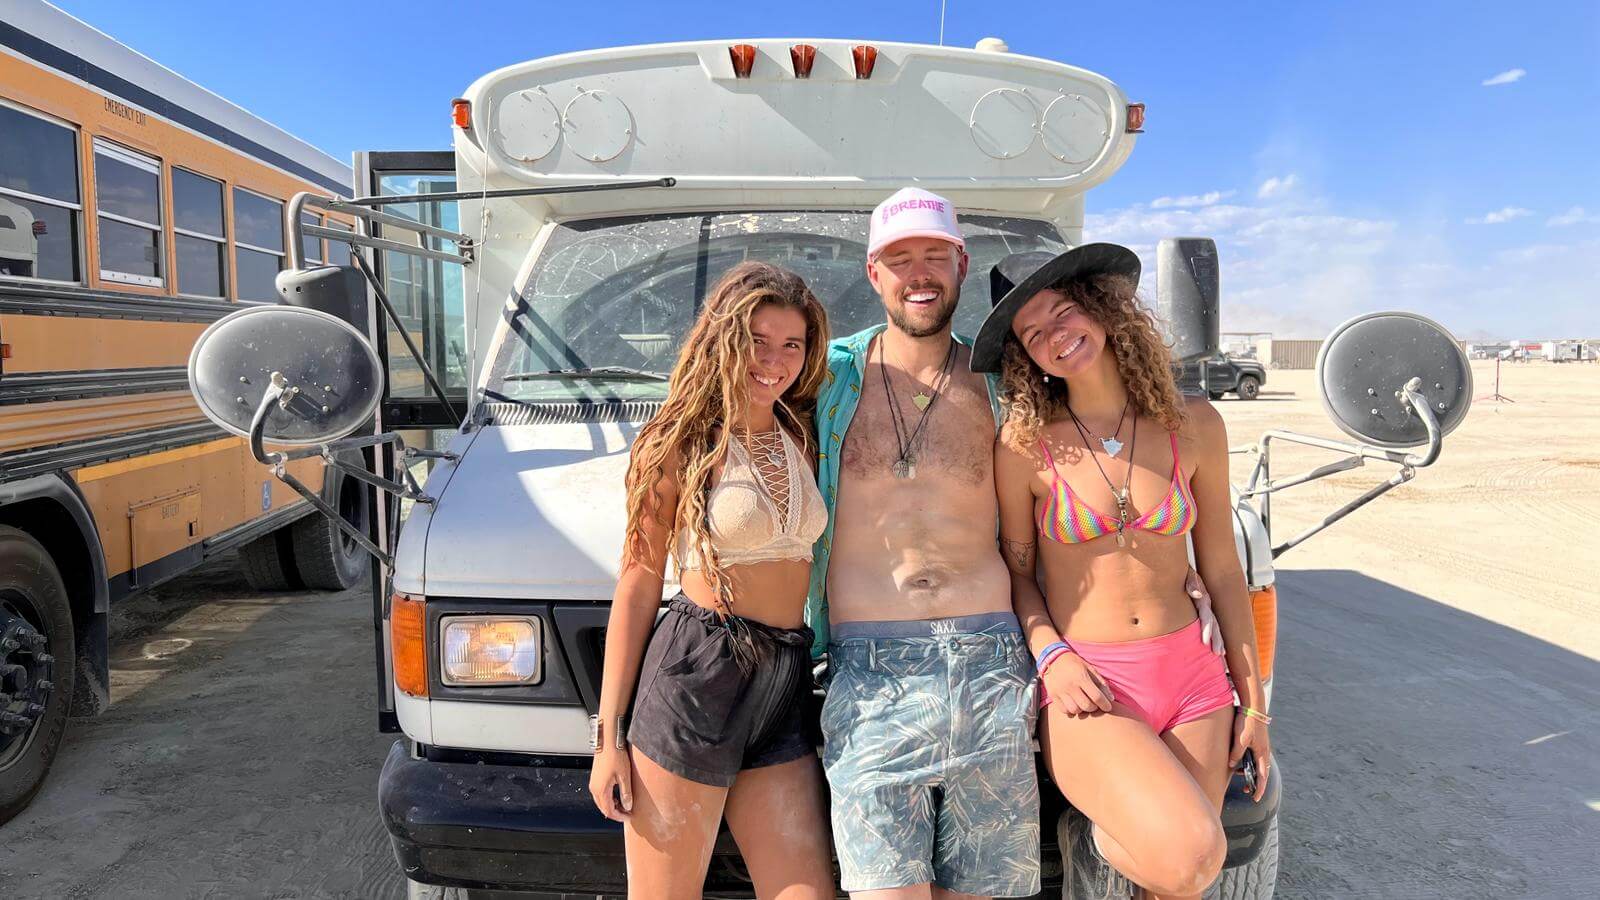 Aud, Amanda, and a kind stranger stood smiling in front of a bus in the desert